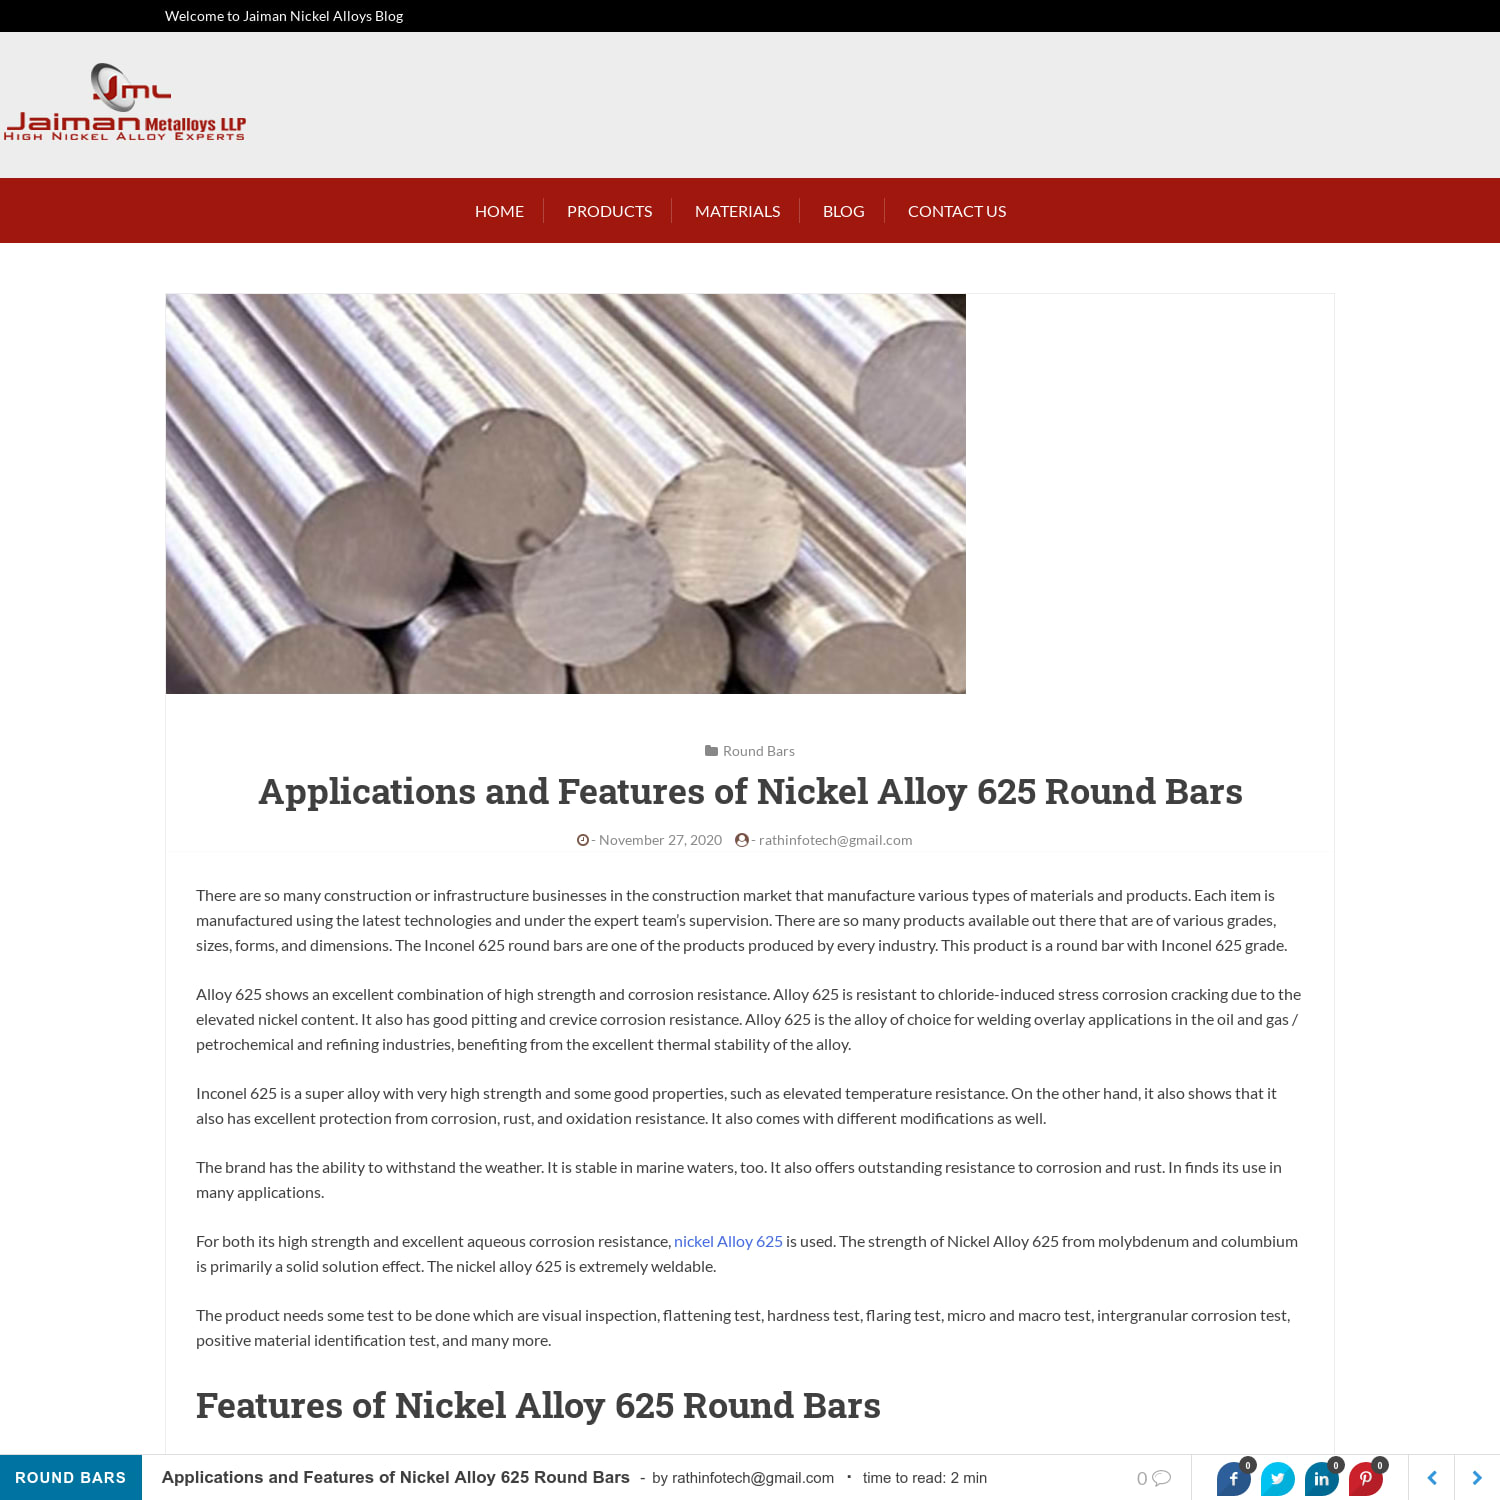 Applications and Features of Nickel Alloy 625 Round Bars - jaimannickelalloys.com Blog